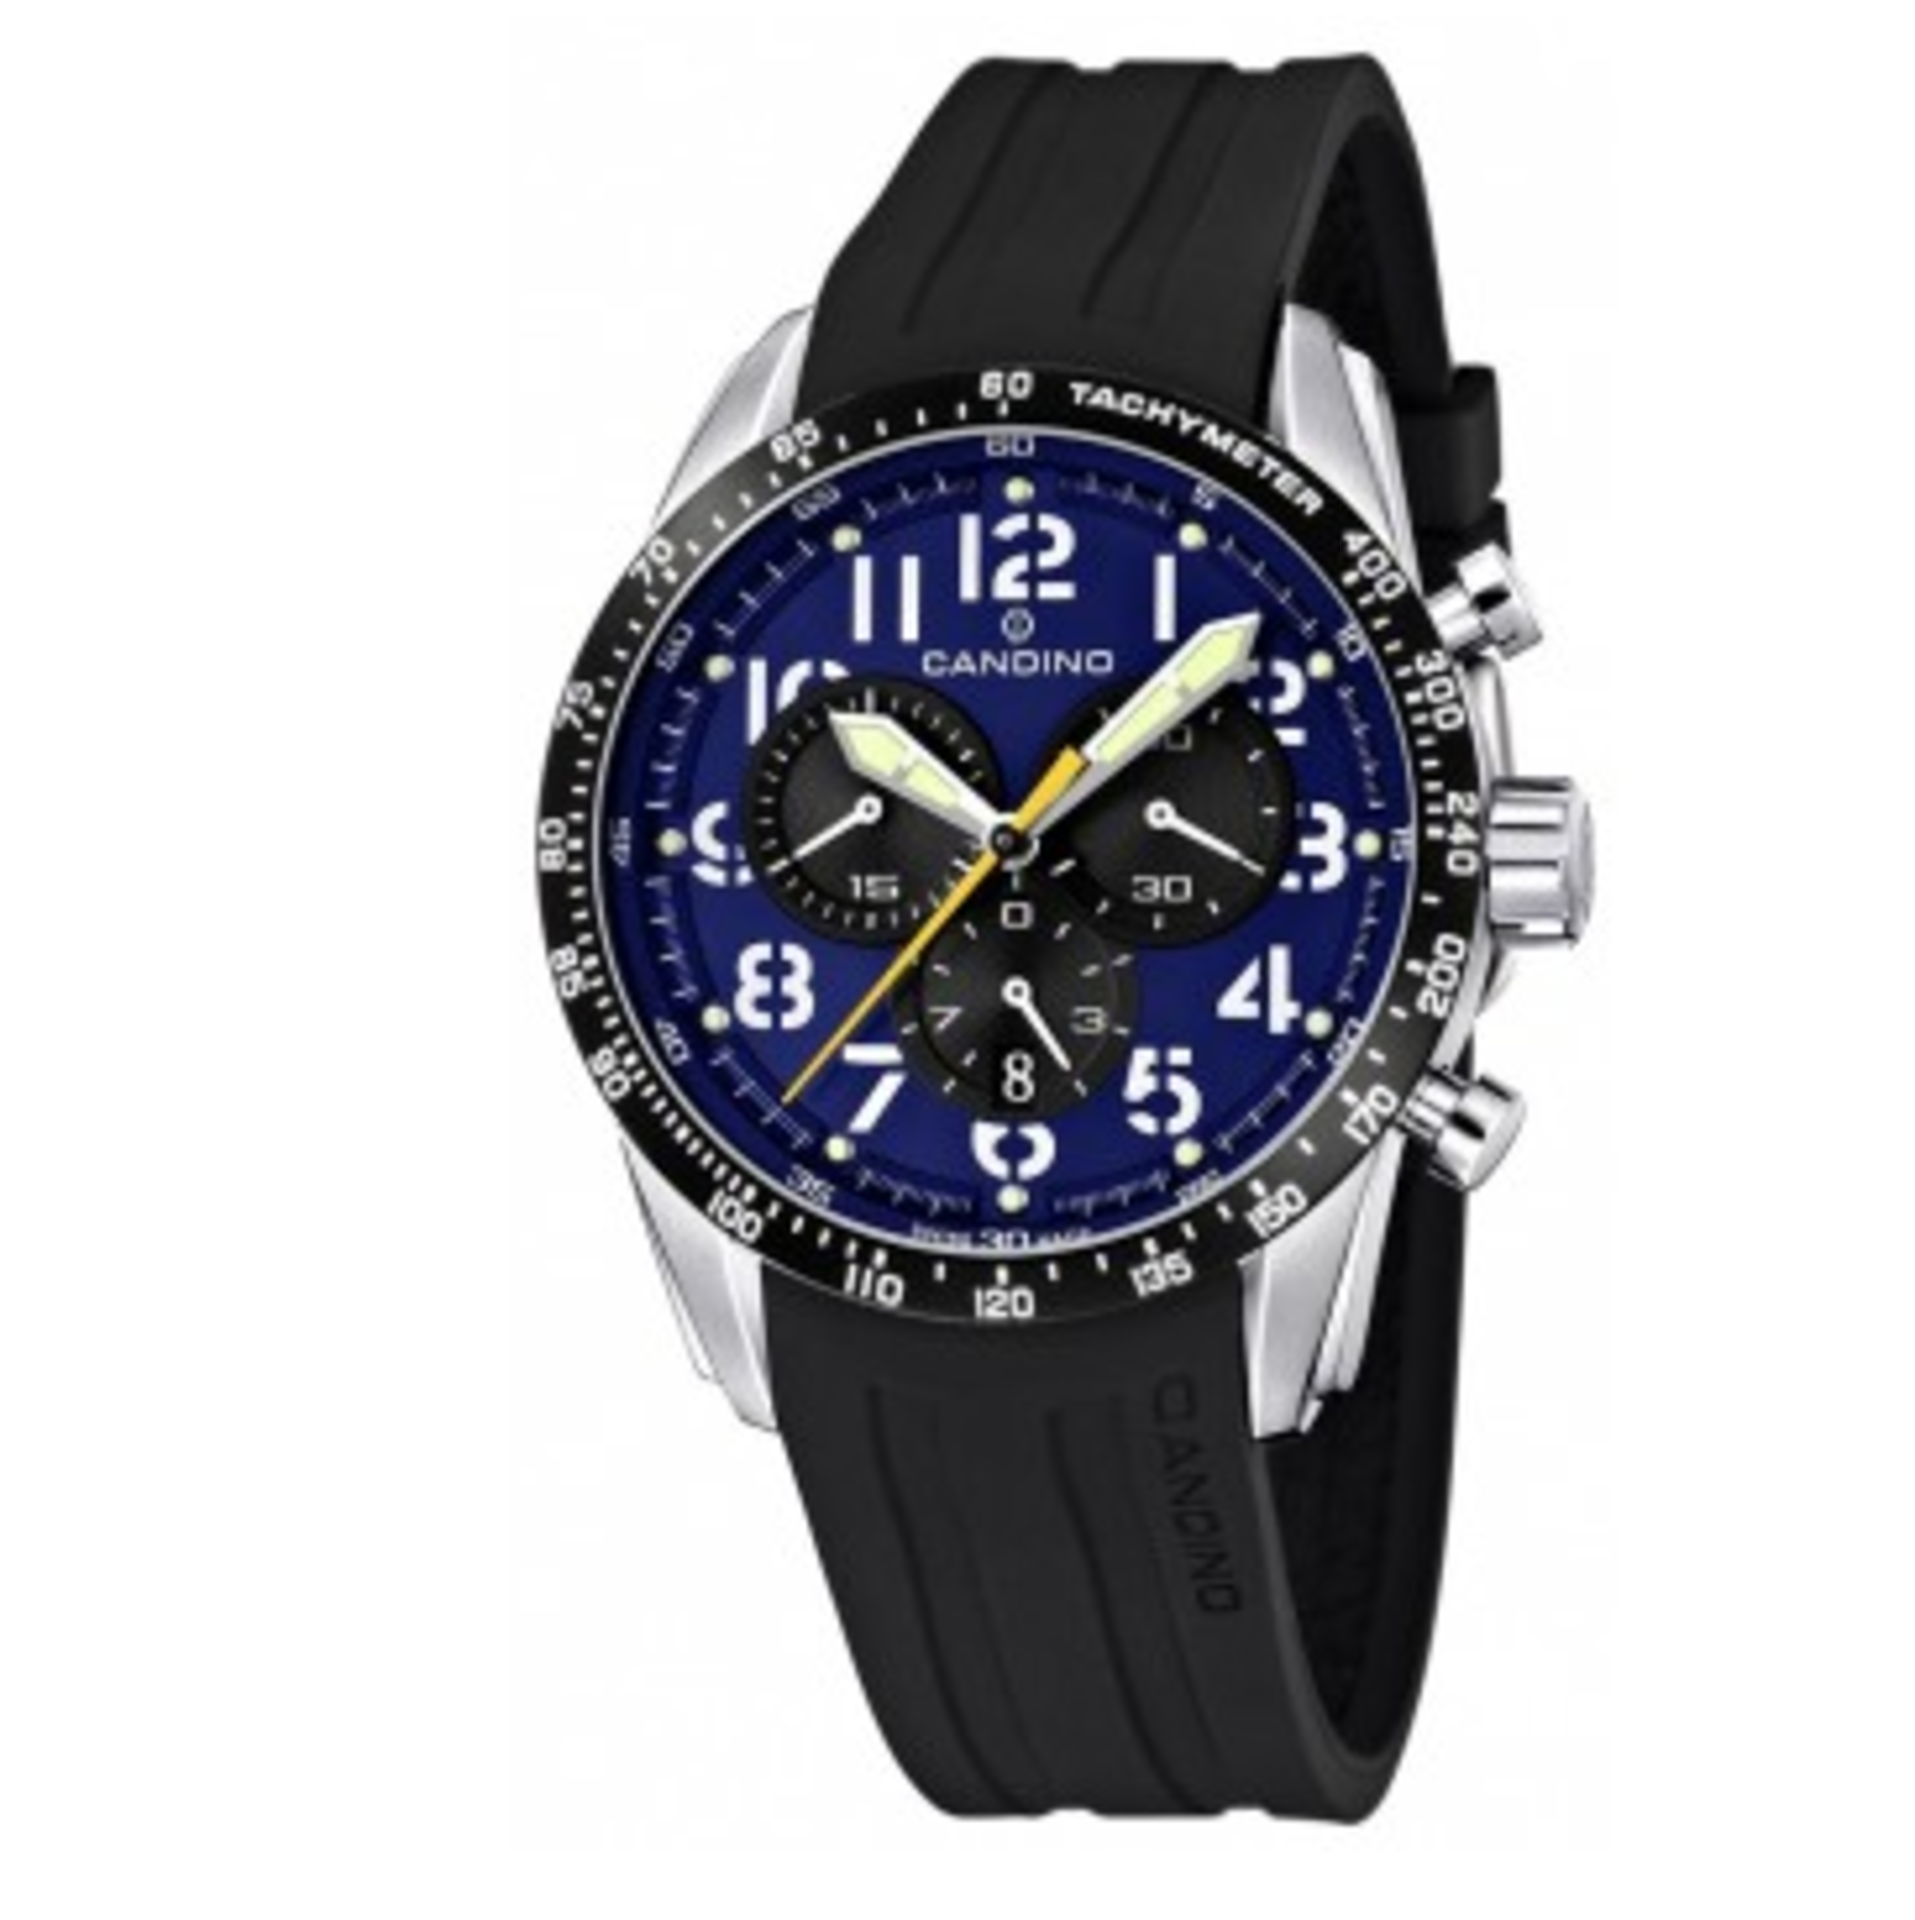 Candino Men's Watch with Blue Dial Chronograph Display and Black Strap - RRP £237